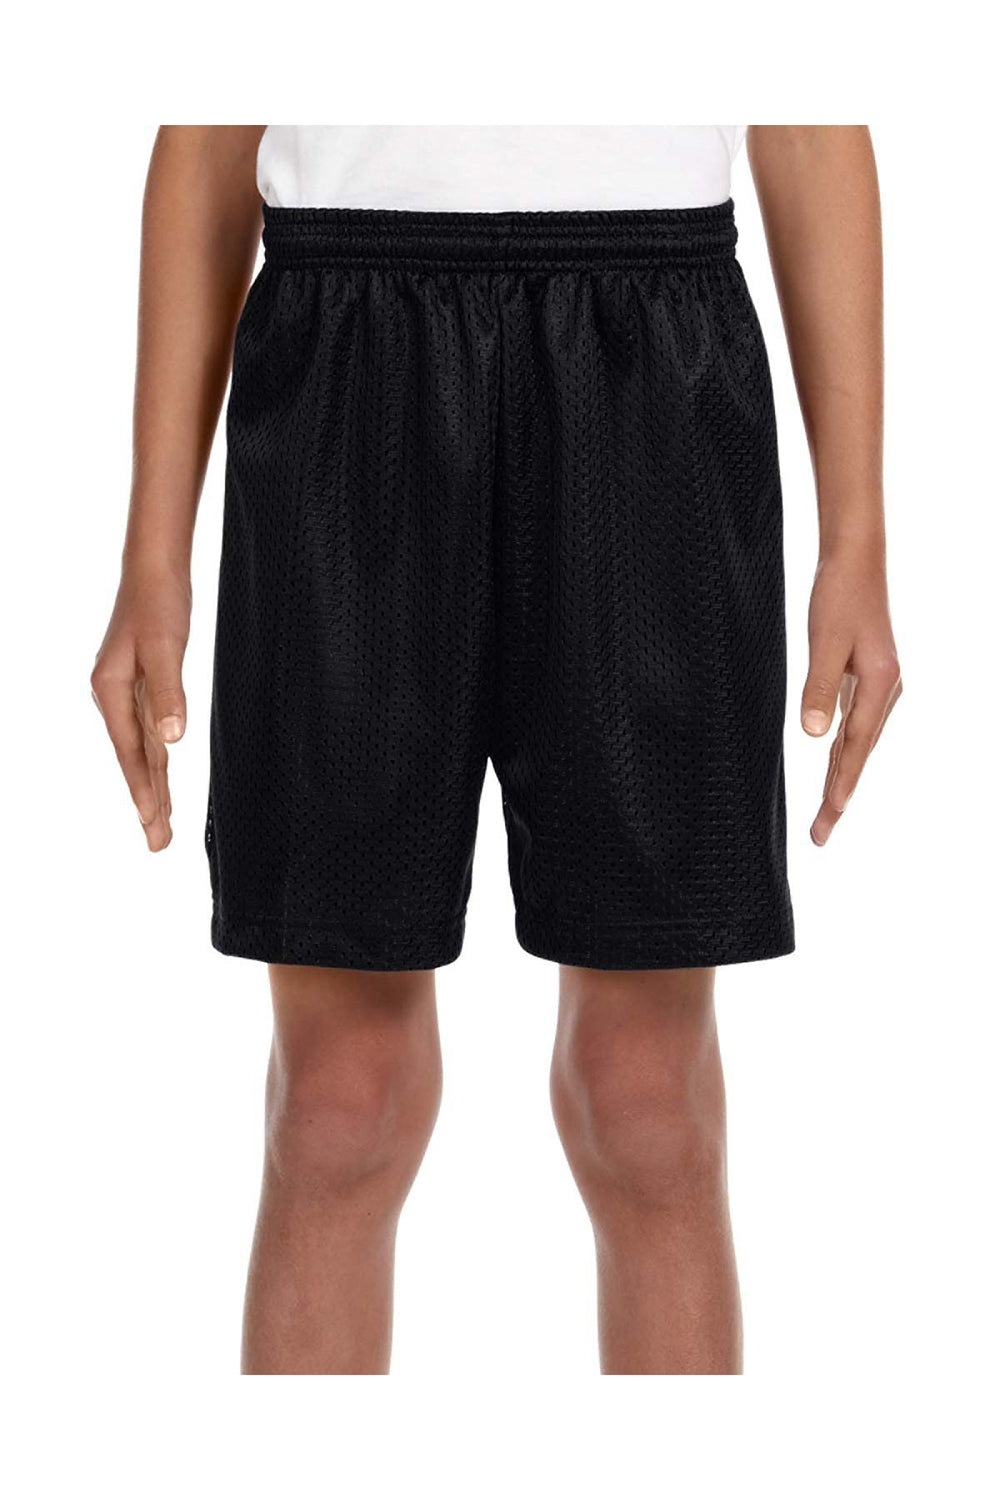 A4 NB5301 Youth Moisture Wicking Mesh Shorts Black Model Front